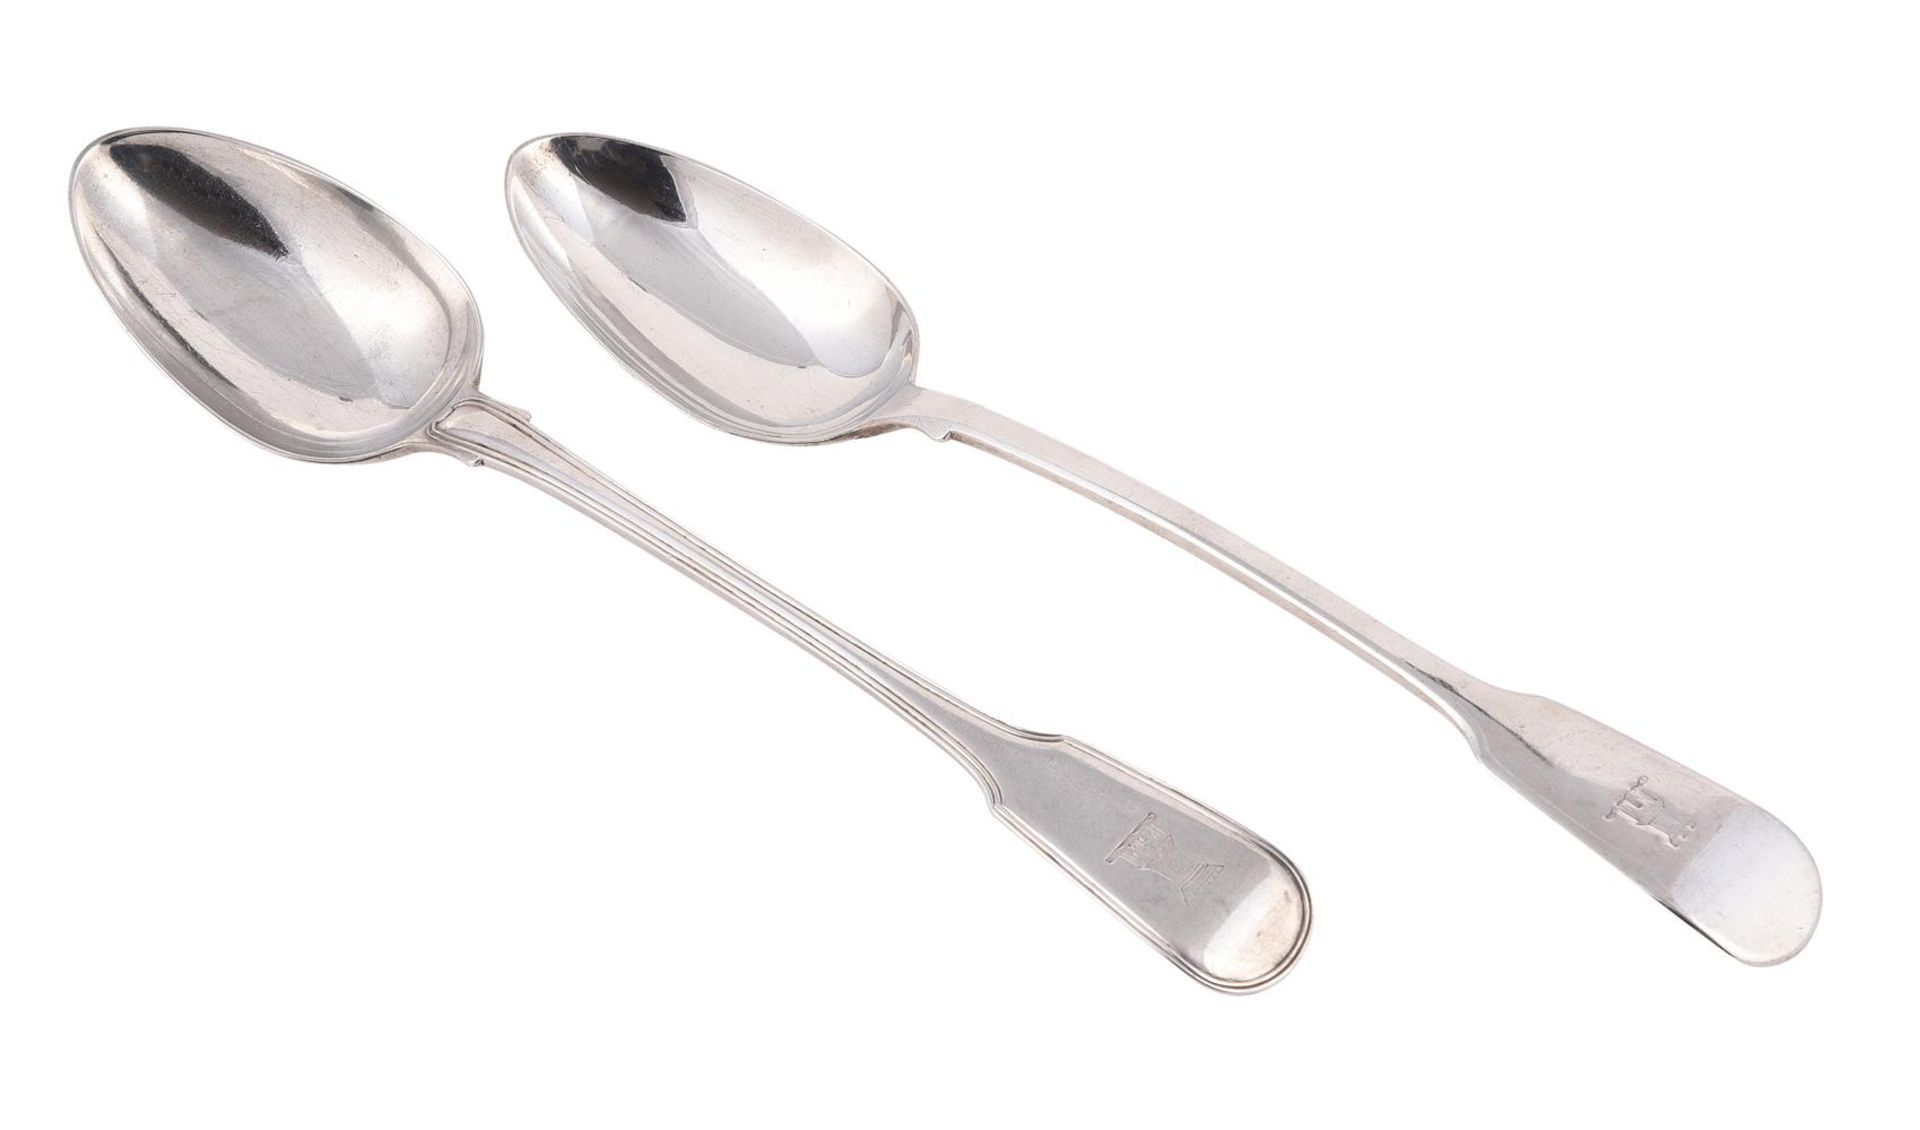 A GEORGE III SILVER FIDDLE AND THREAD PATTERN BASTING SPOON